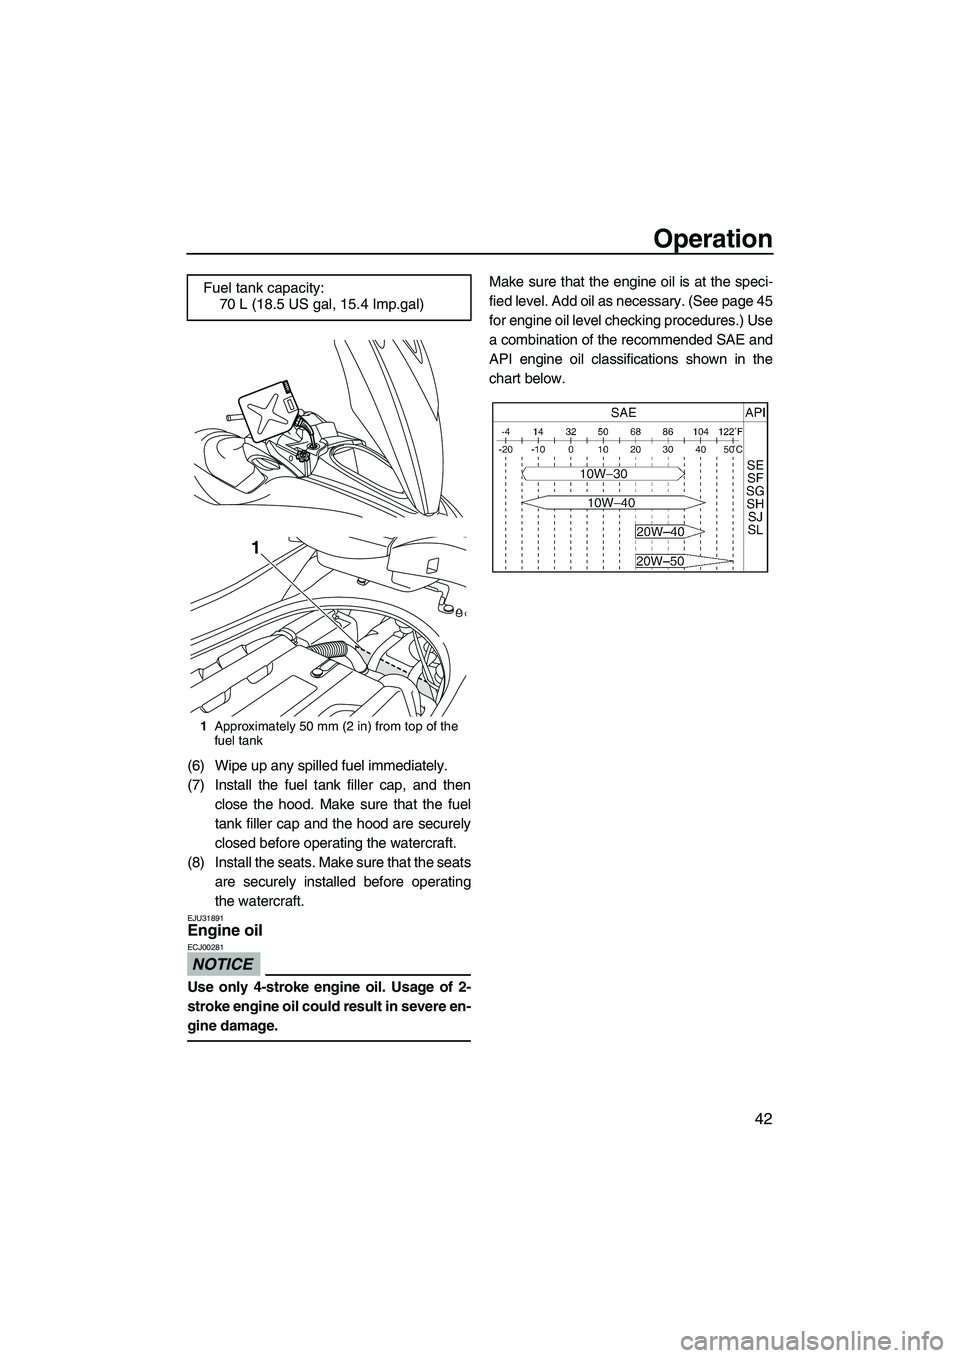 YAMAHA FZR 2009  Owners Manual Operation
42
(6) Wipe up any spilled fuel immediately.
(7) Install the fuel tank filler cap, and then
close the hood. Make sure that the fuel
tank filler cap and the hood are securely
closed before op